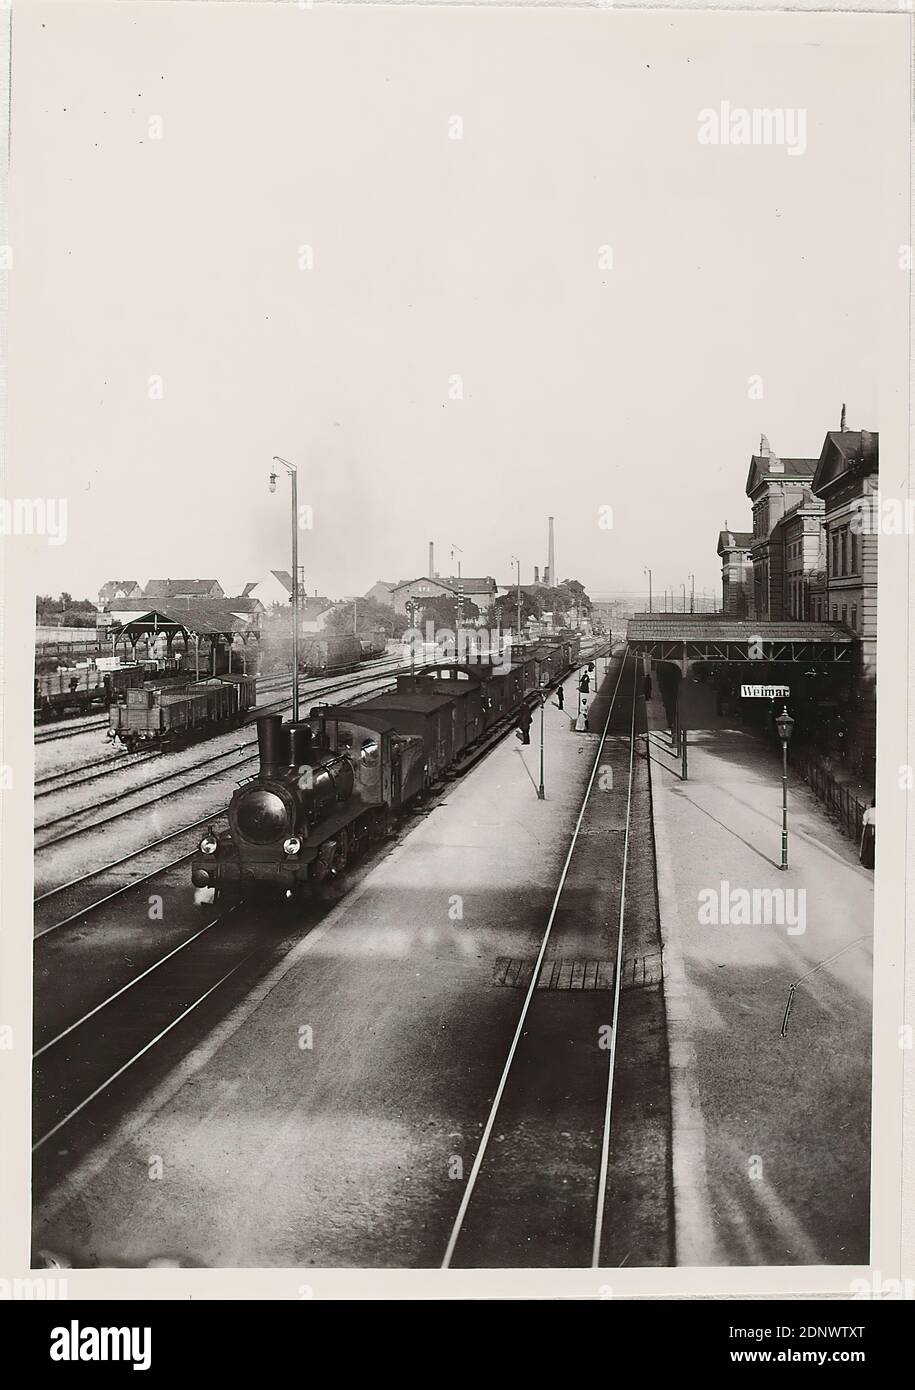 Louis Held, Bahnhof in Weimar, ca. 1890, Staatliche Landesbildstelle Hamburg, collection on the history of photography, silver gelatine paper, cardboard, black and white positive process, image size: height: 11.70 cm; width: 8.00 cm, inscribed: verso and on the cardboard: photographer, place, designation, dimensions and inv.- No. handwritten in black, stamp: verso and left on the cardboard: stamp Staatliche Landesbildstelle Hamburg, reporting photography, railway, train, station, stop (railroad, streetcar), hist. Building, locality, street, hist. Place, city, village, Weimar Stock Photo